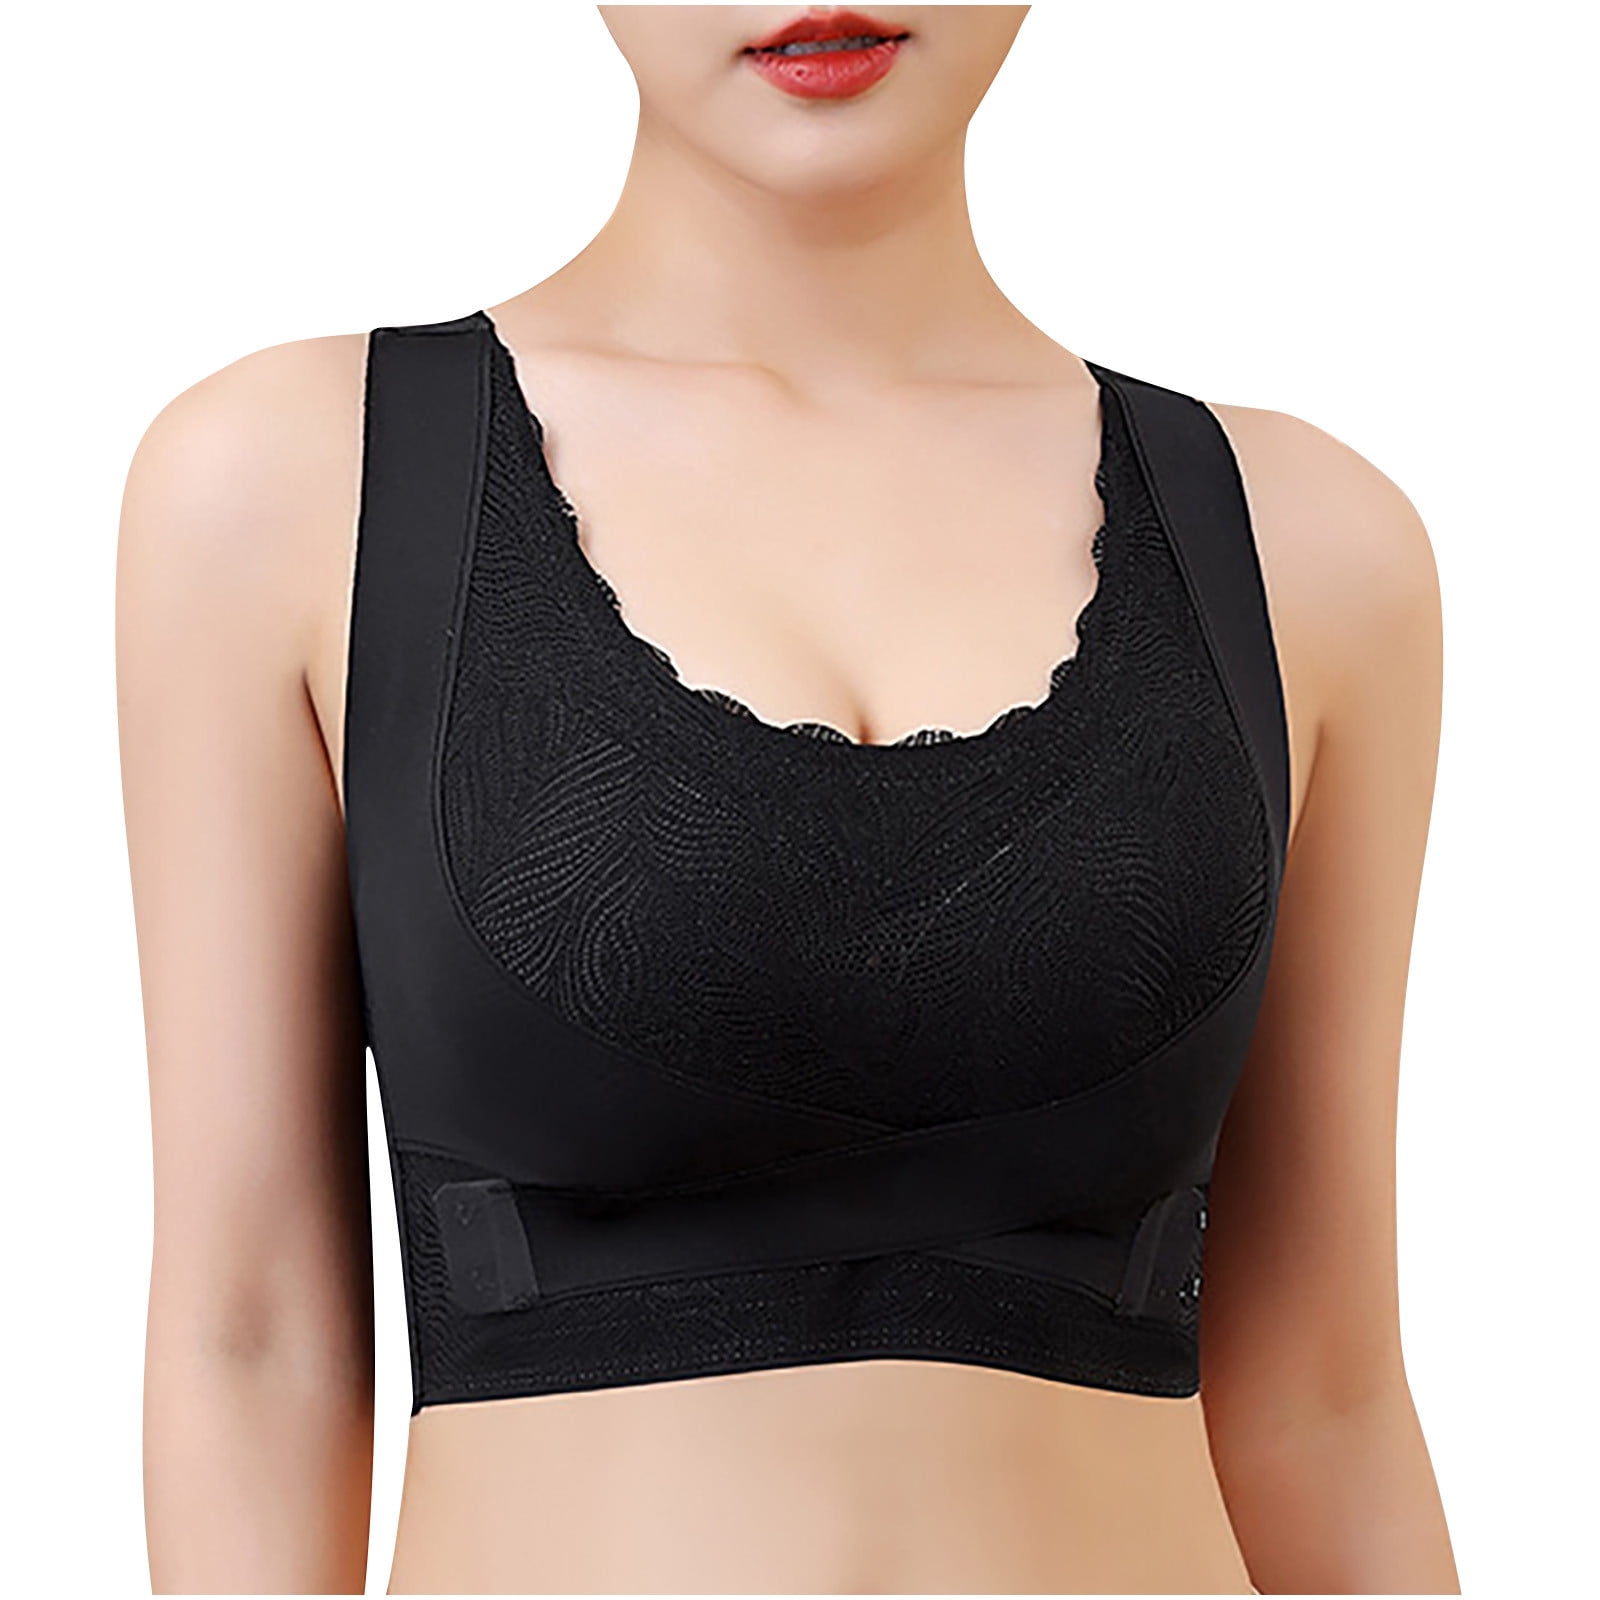 WQQZJJ Sports Bras For Women Ladies'plain Color Front Cross Side Lace Sports  Bra Full Cup Bra Vest Tops Bras For Women Gifts On Clearance 